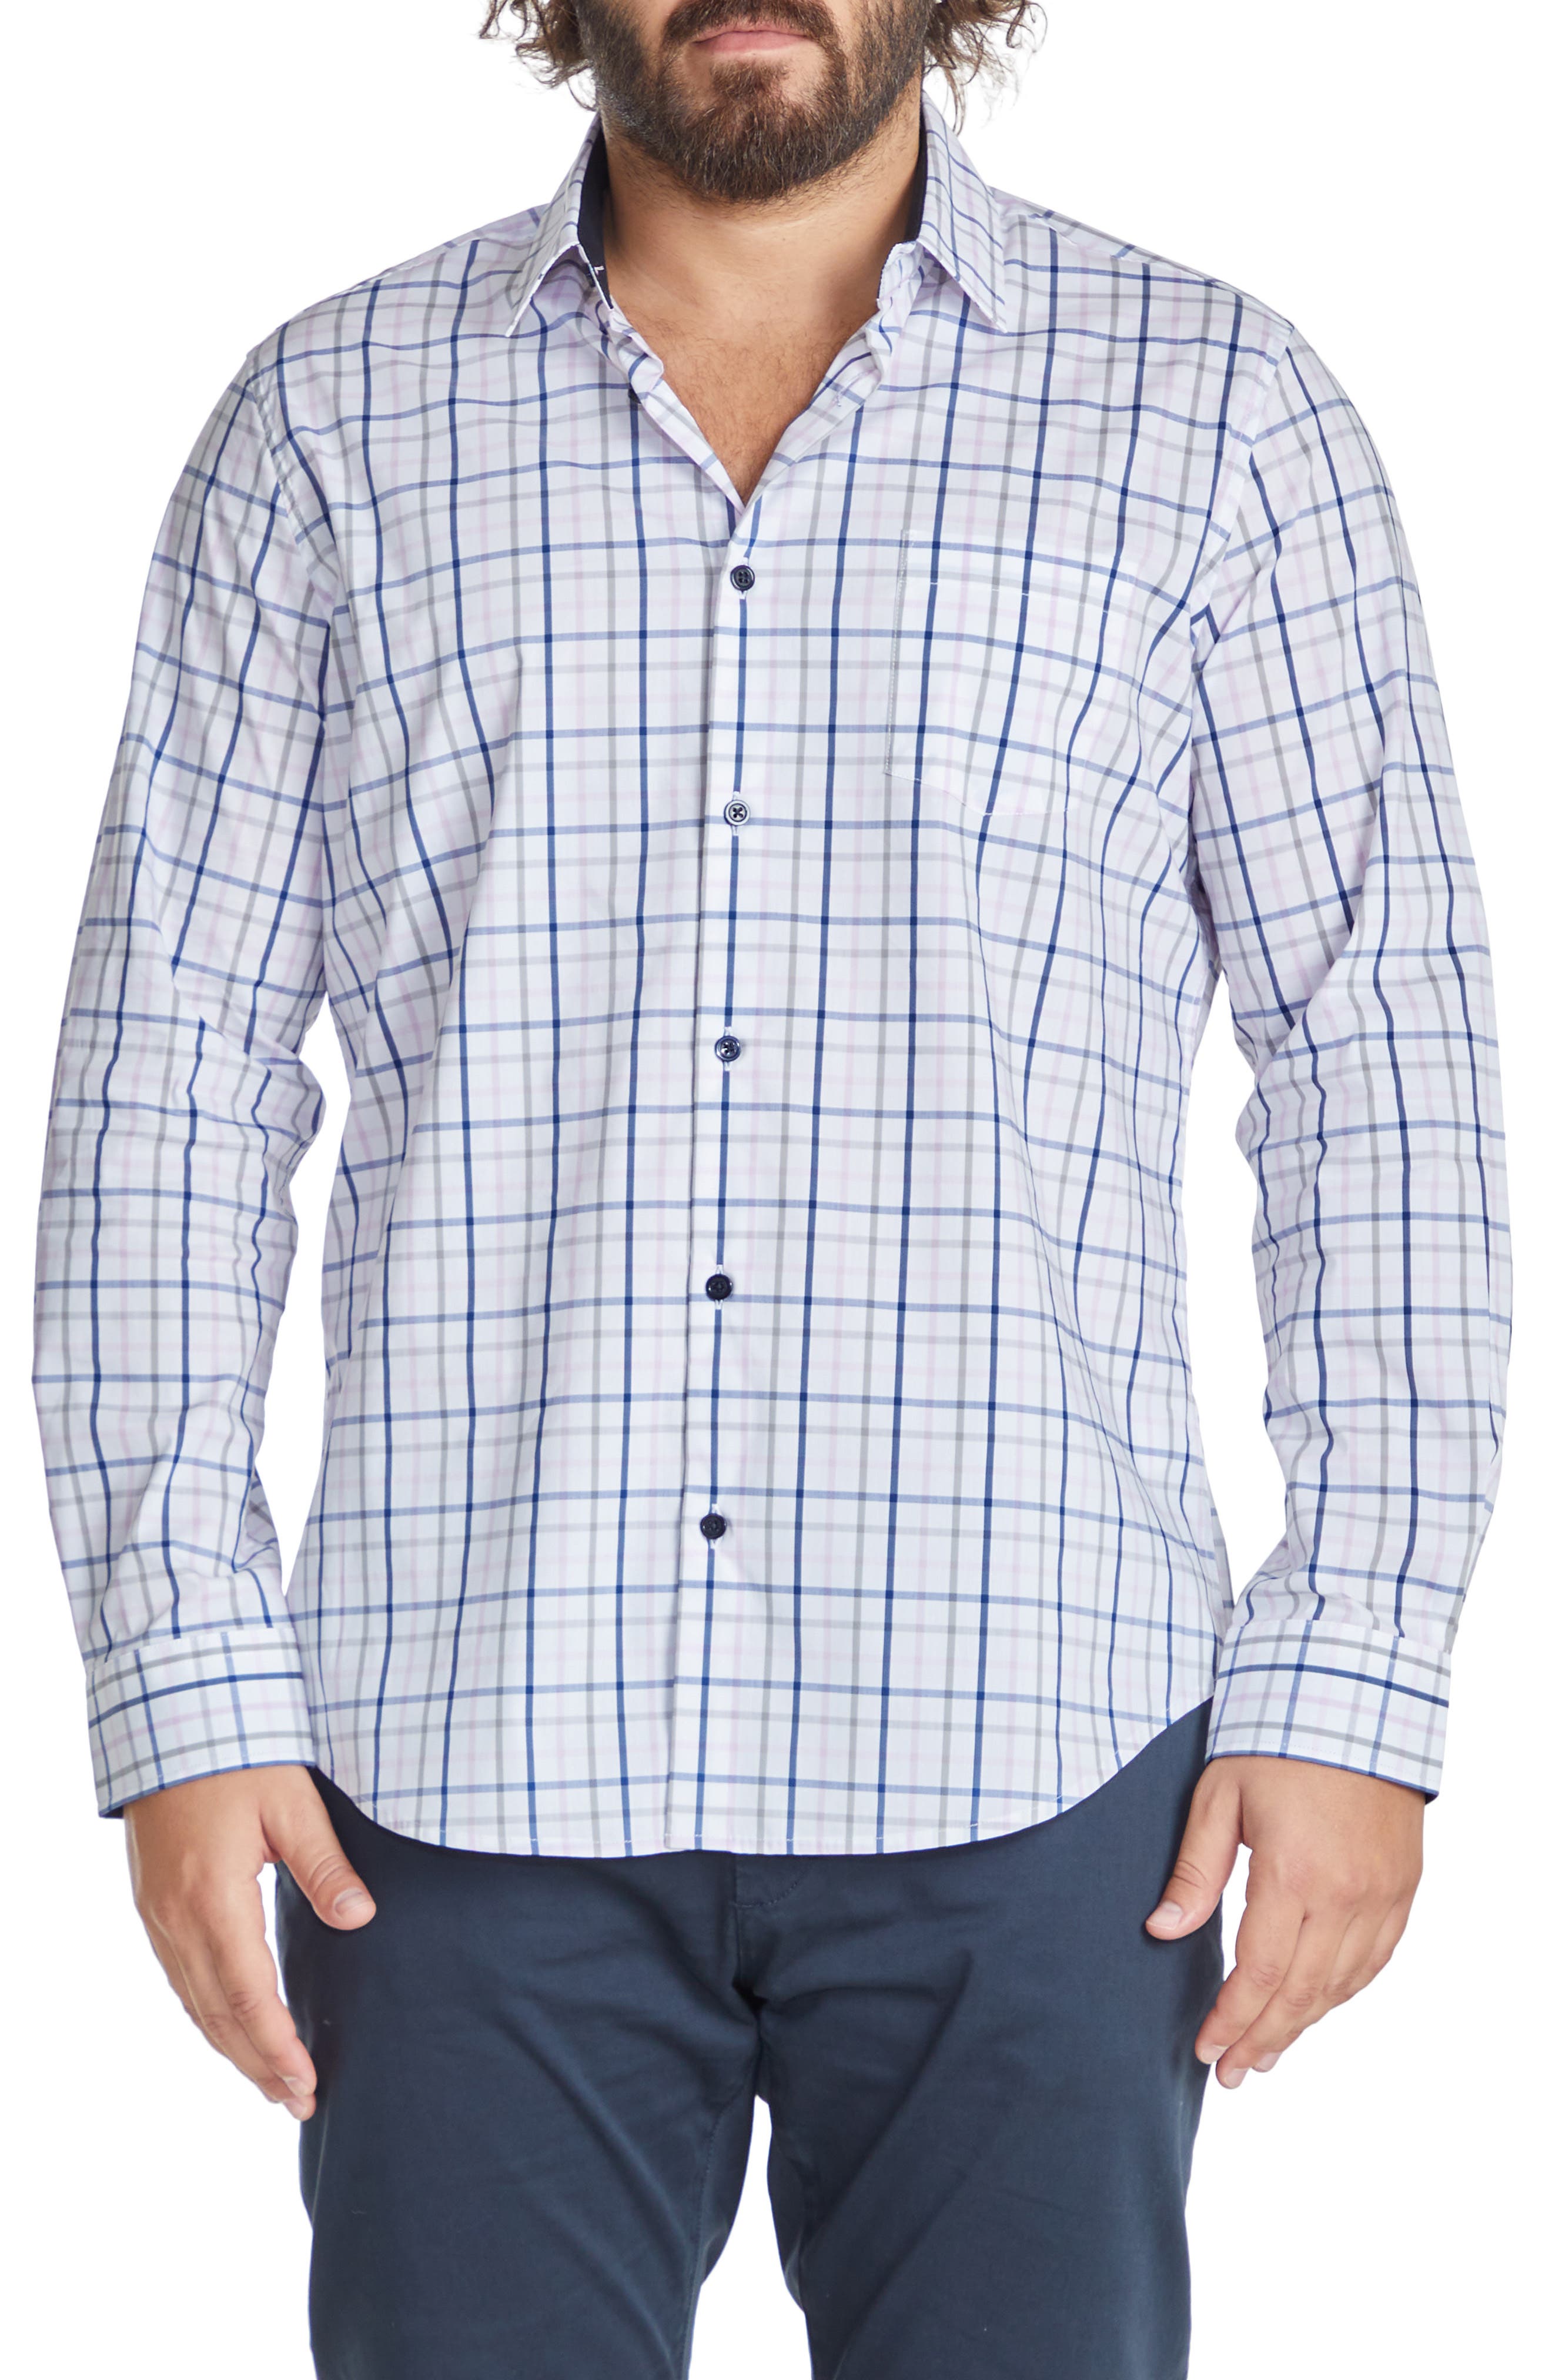 Johnny Bigg Cyrus Check Stretch Cotton Button-Up Shirt in White at Nordstrom